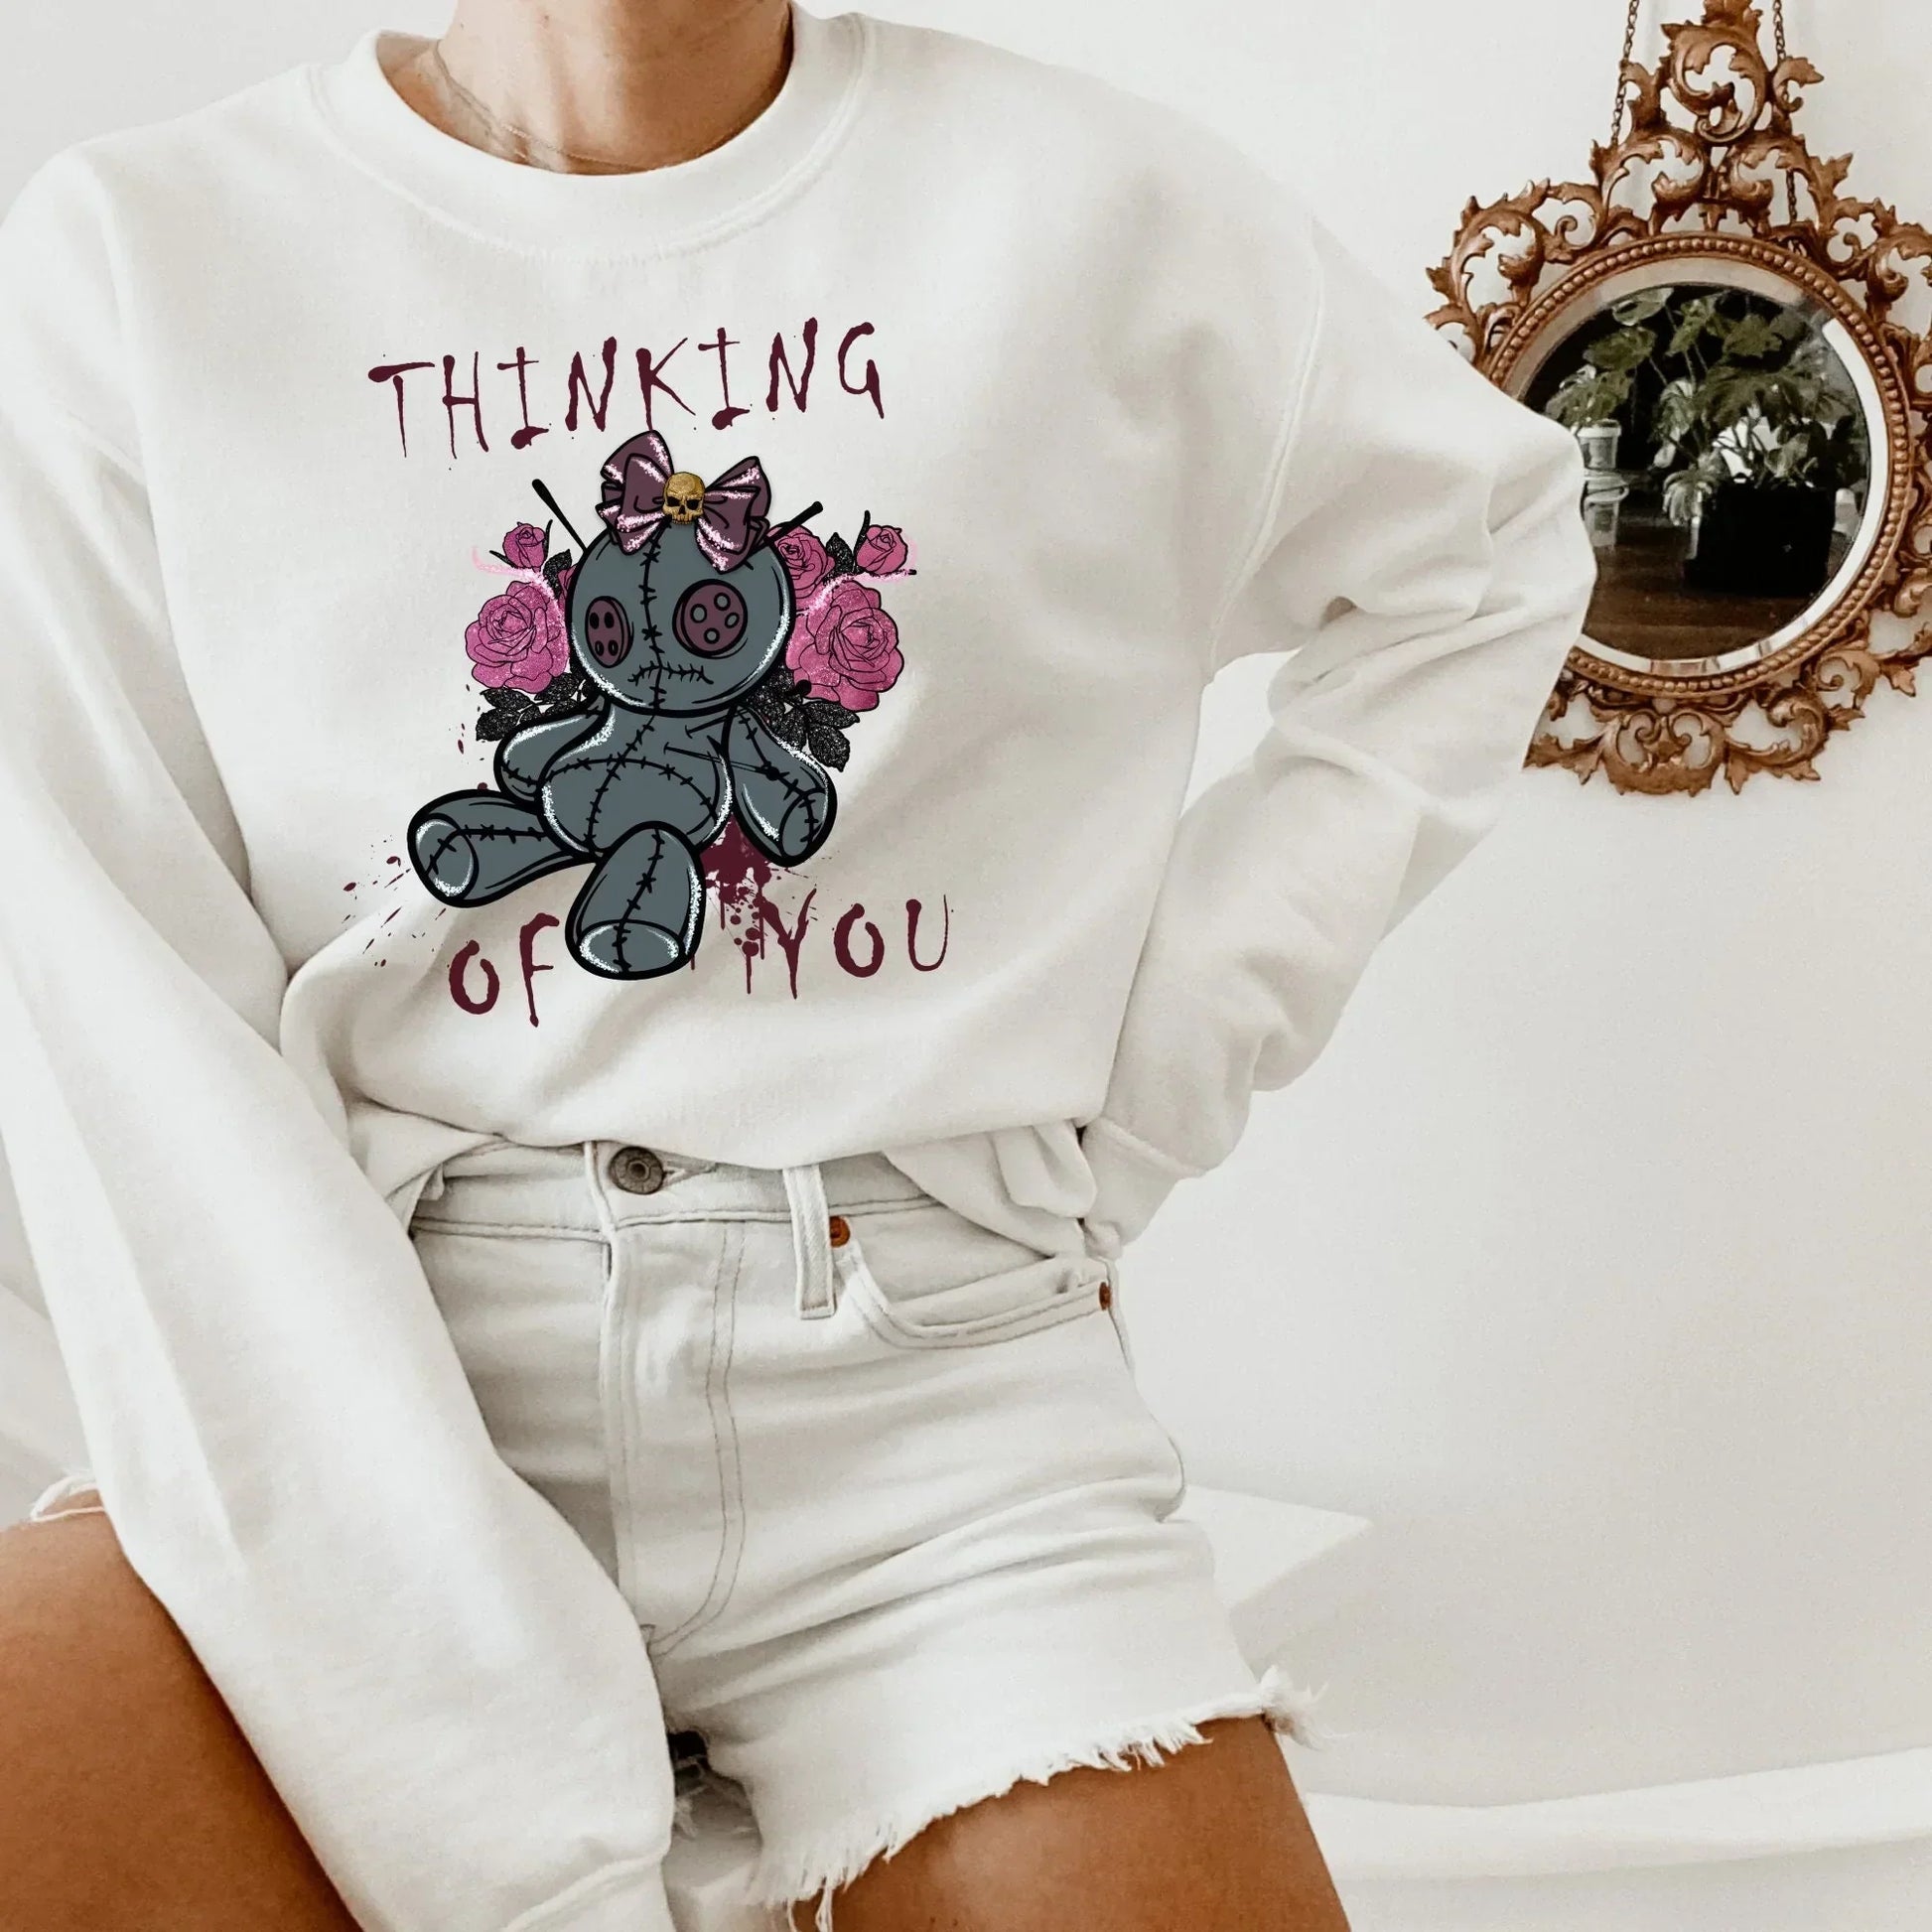 Pastel Gothic Shirt, Witchy Vibes Sweatshirt, Skull Shirt, Goth Style Grunge Shirt, Aesthetic Clothing, Trippy Gift for Her, Witch Tee HMDesignStudioUS